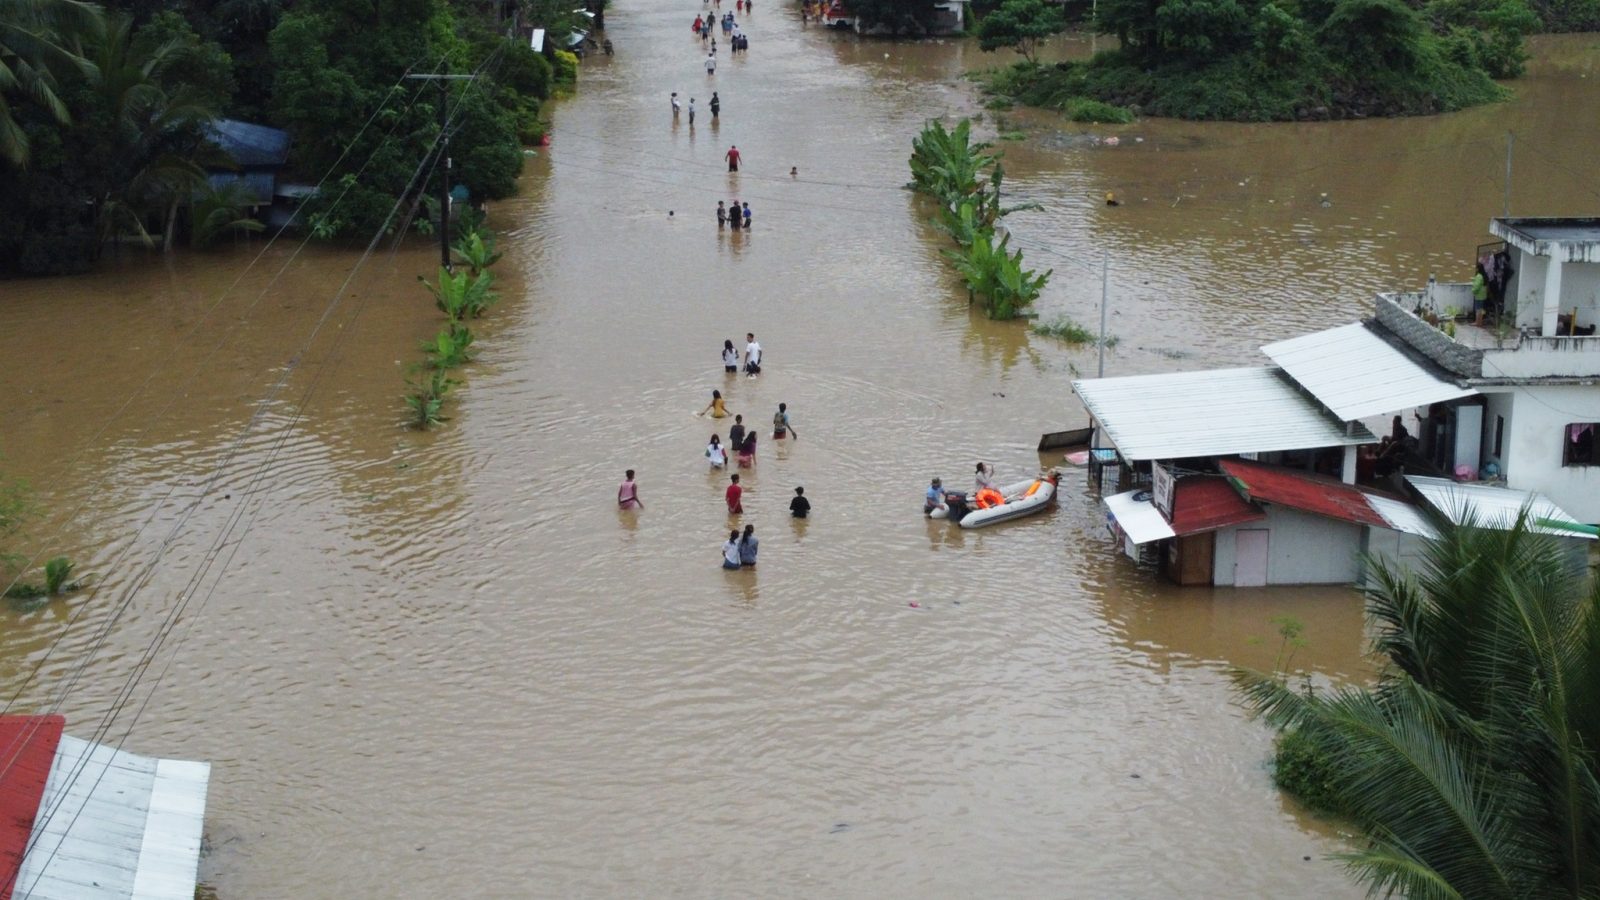 Mindanao prelate calls for prayers, aid for flood victims in southern